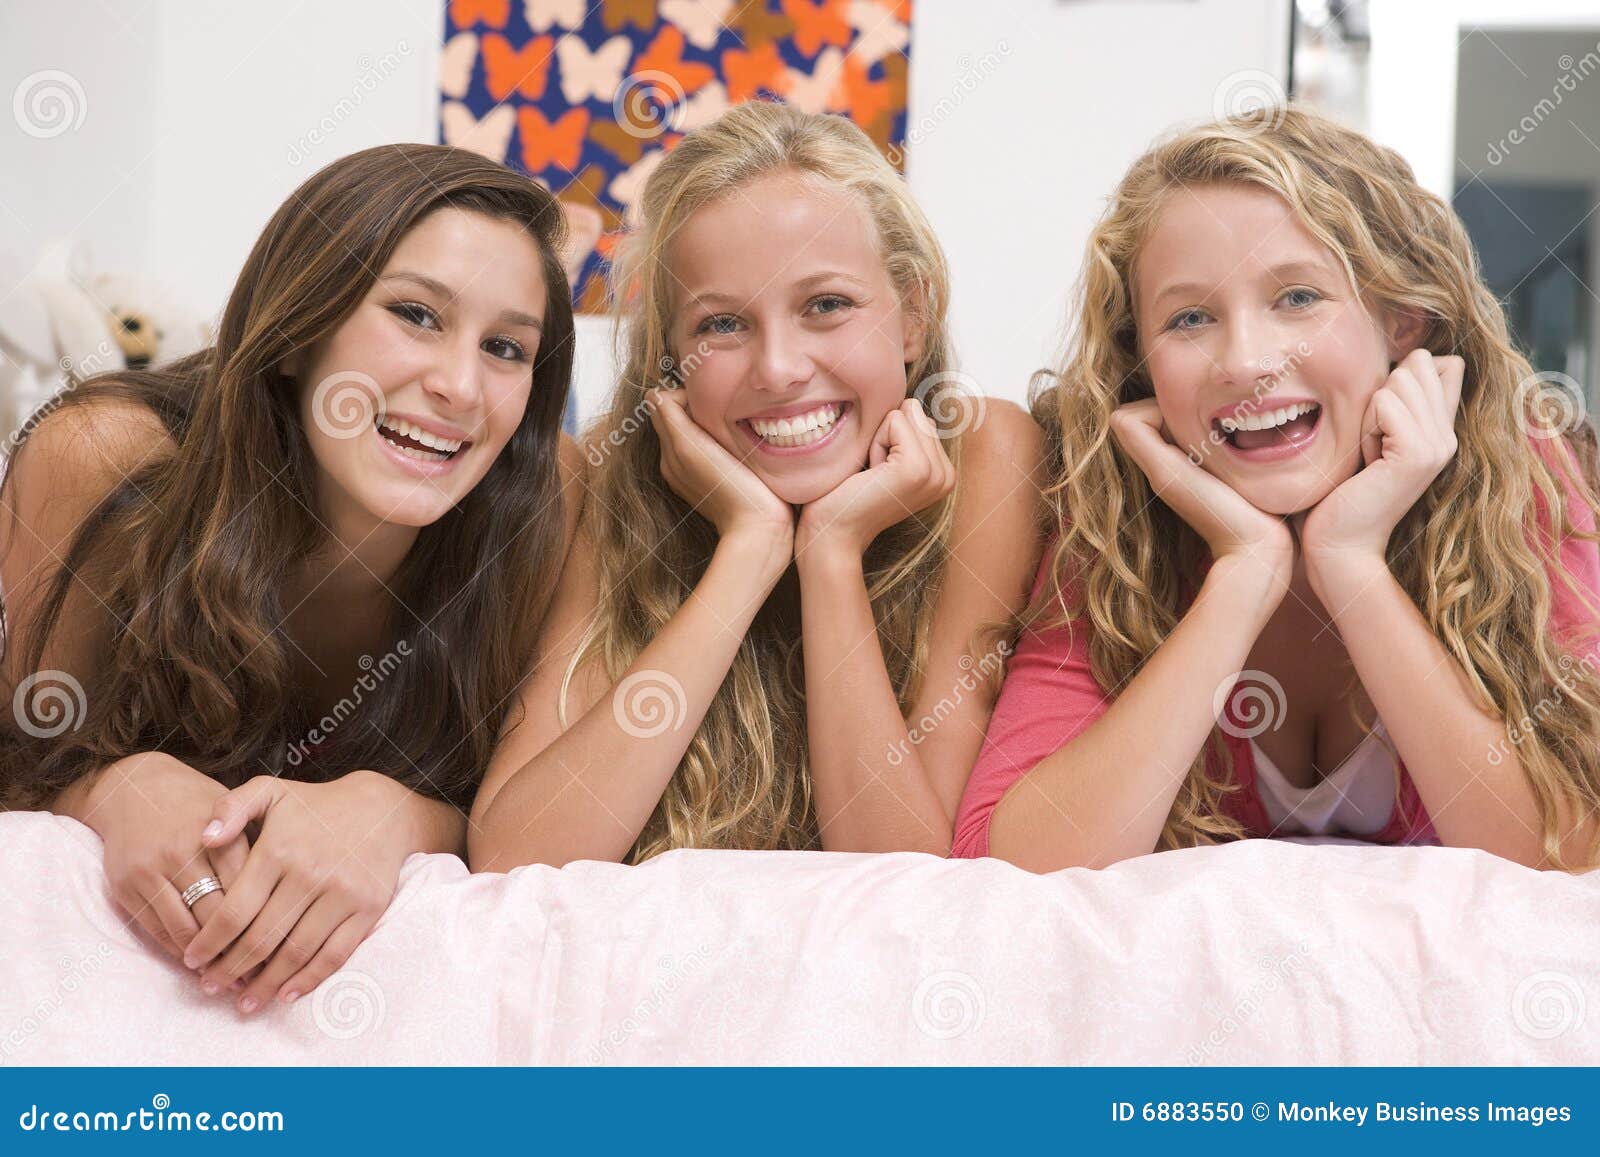 Teenage Girls In A Bedroom Fist Bumping Friendship Concept Royalty Free